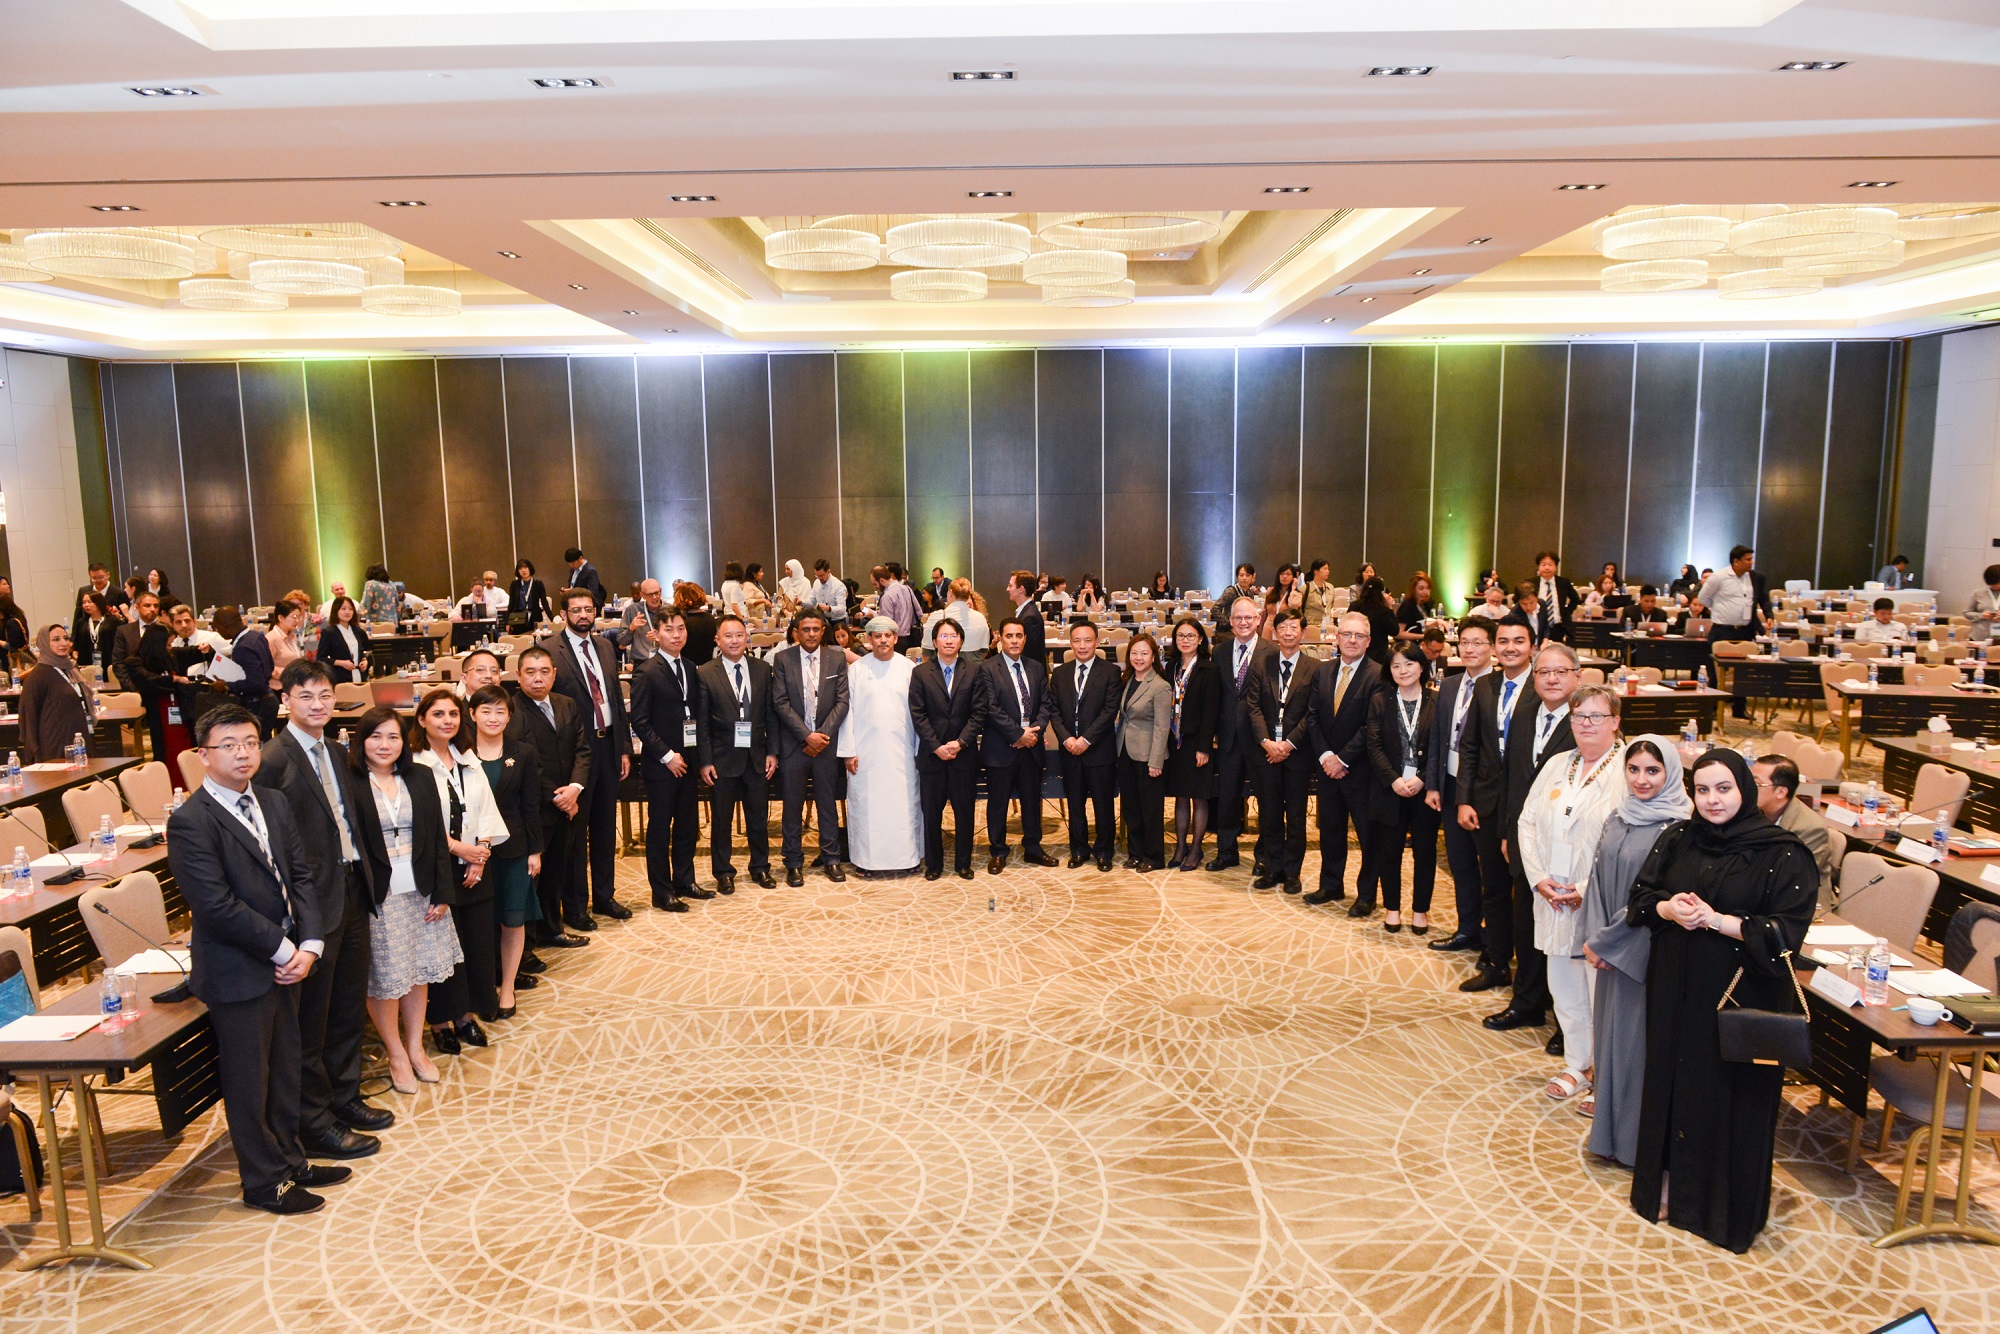 24th AHWP Annual Meeting Photos, Muscat, Oman 2019